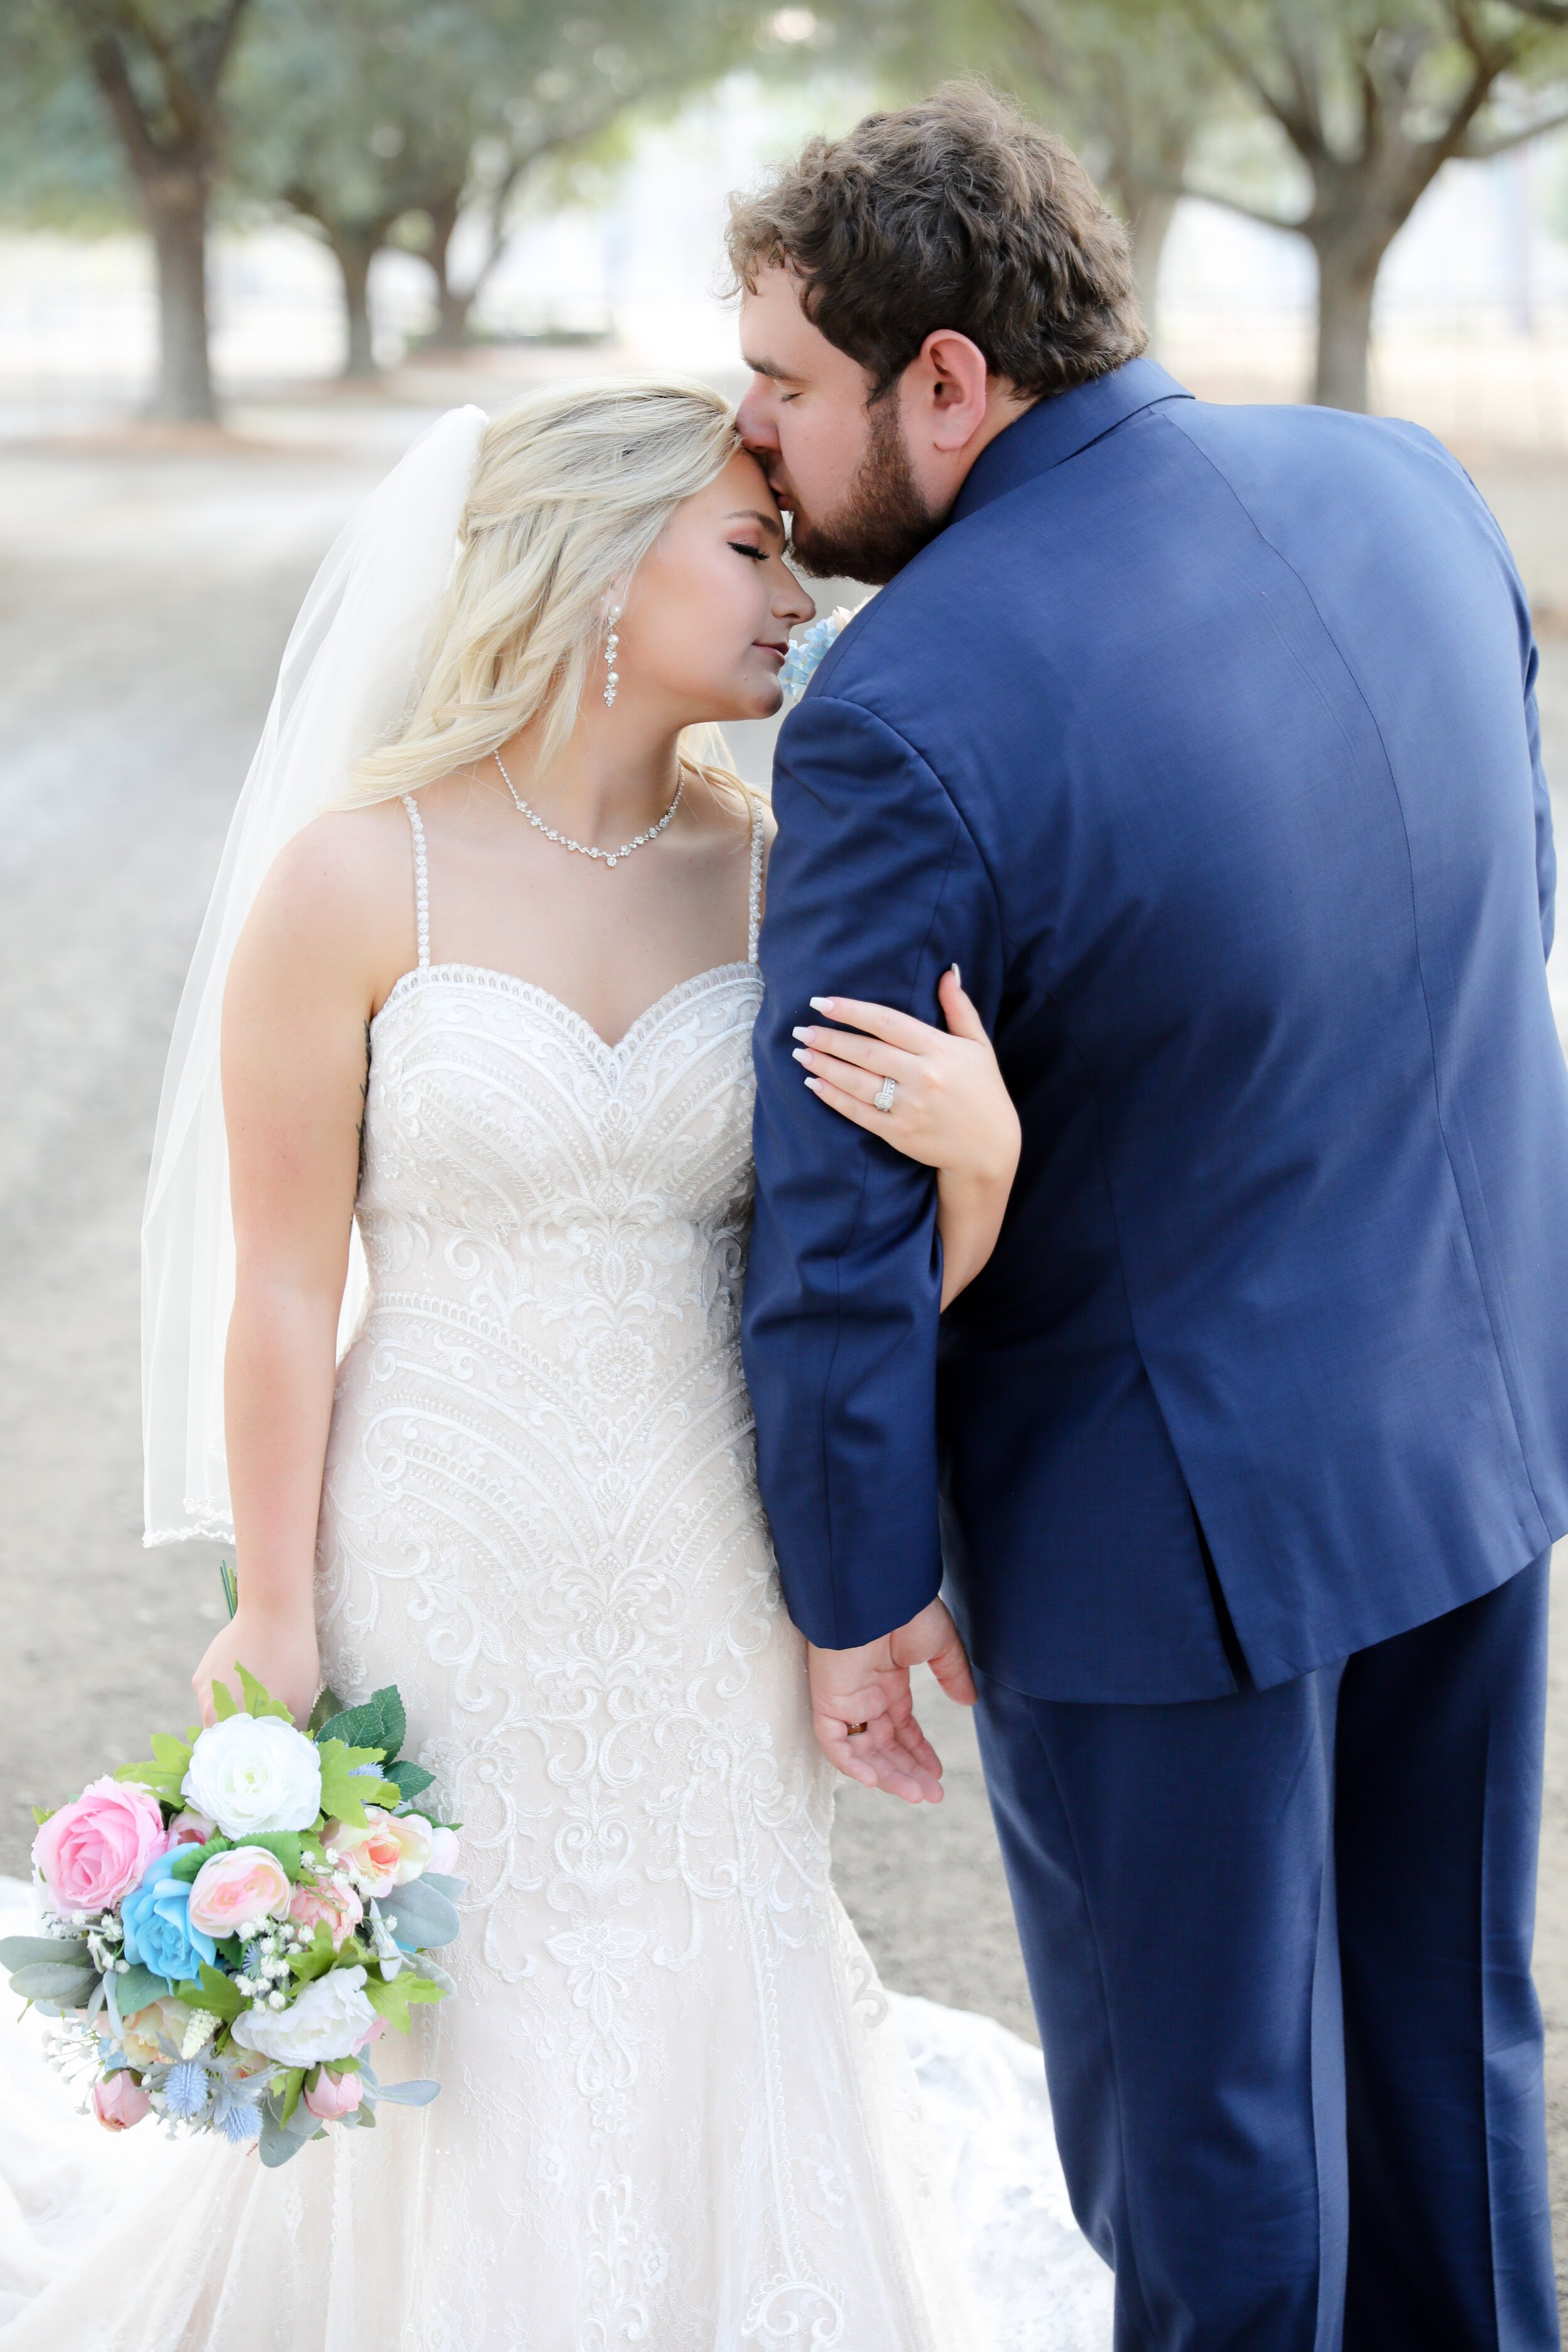 ivory-and-beau-bride-mackenzie-down-for-the-gown-maggie-sottero-wedding-dress-whitney-bridal-gown-wedding-gown-real-bride-blog-wedding-blog-bridal-shop-bridal-boutique-bridal-shopping-savannah-georgia-BrookeCollinsPhotography-351.jpg